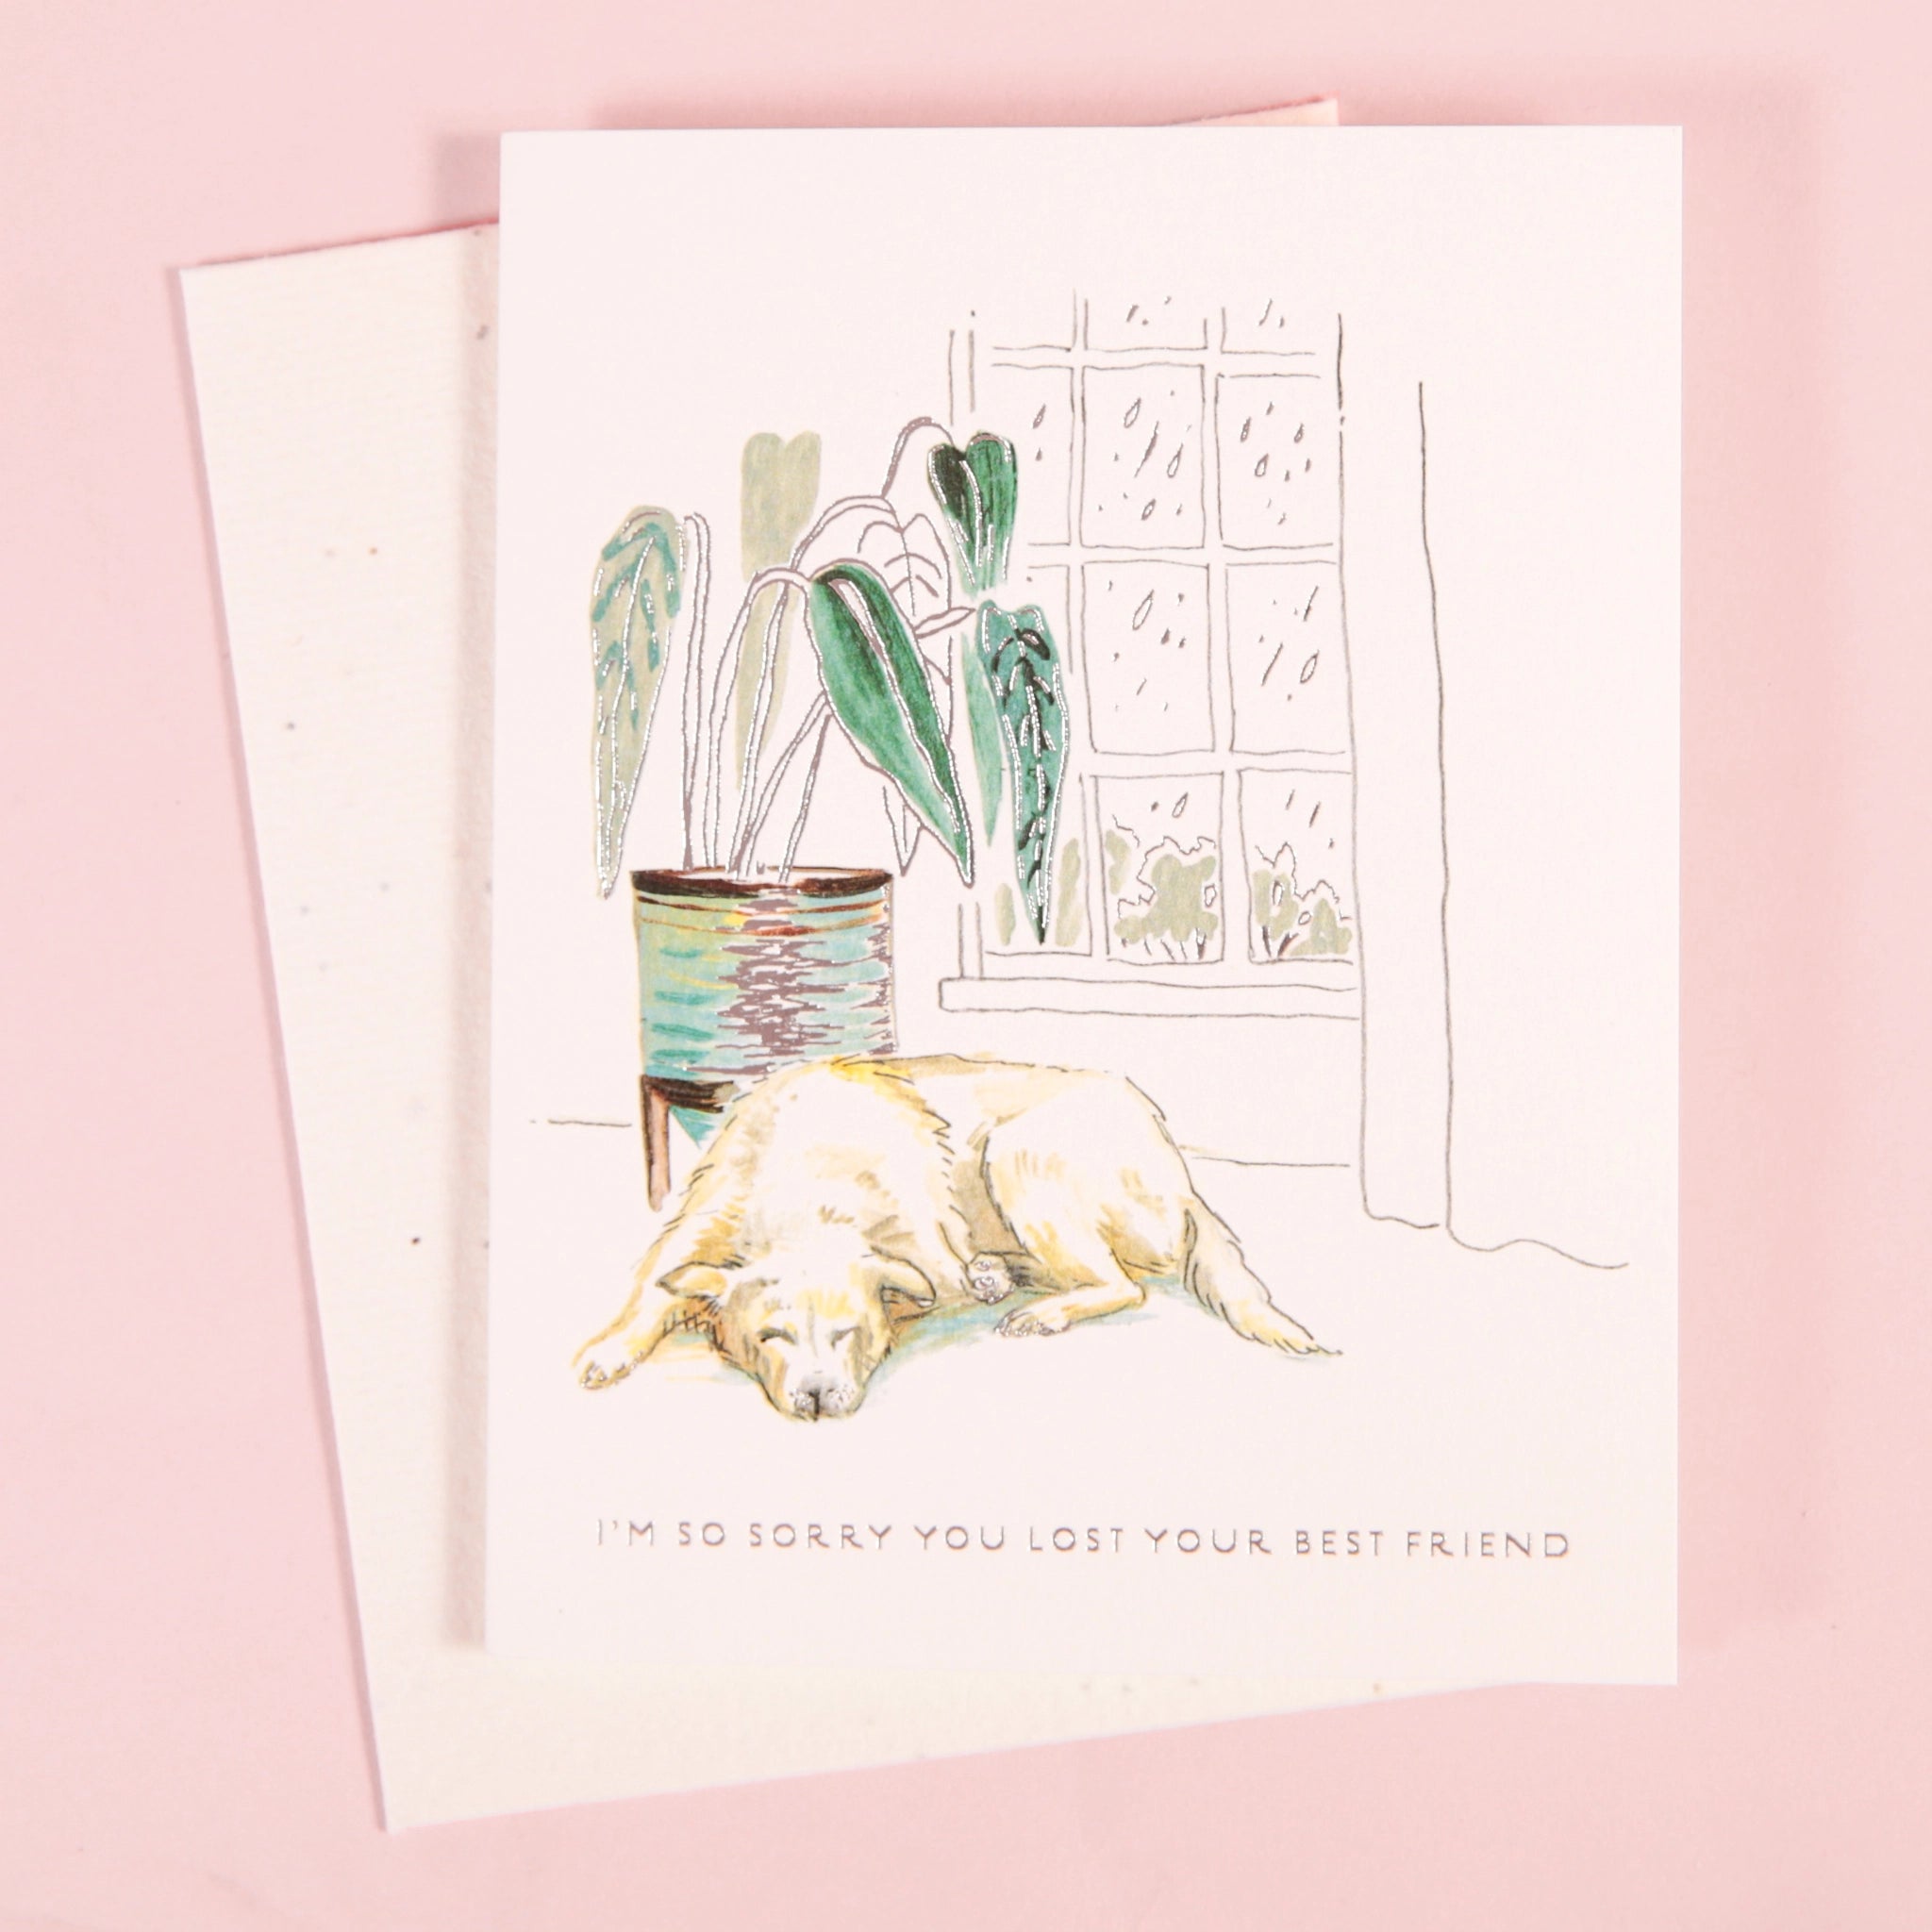 On a light pink background is a white card and envelope with an illustration of a potted green plant, a window with rain falling outside of it and a sleeping dog along with small text at the bottom that reads, "I'm so sorry you lost your best friend".